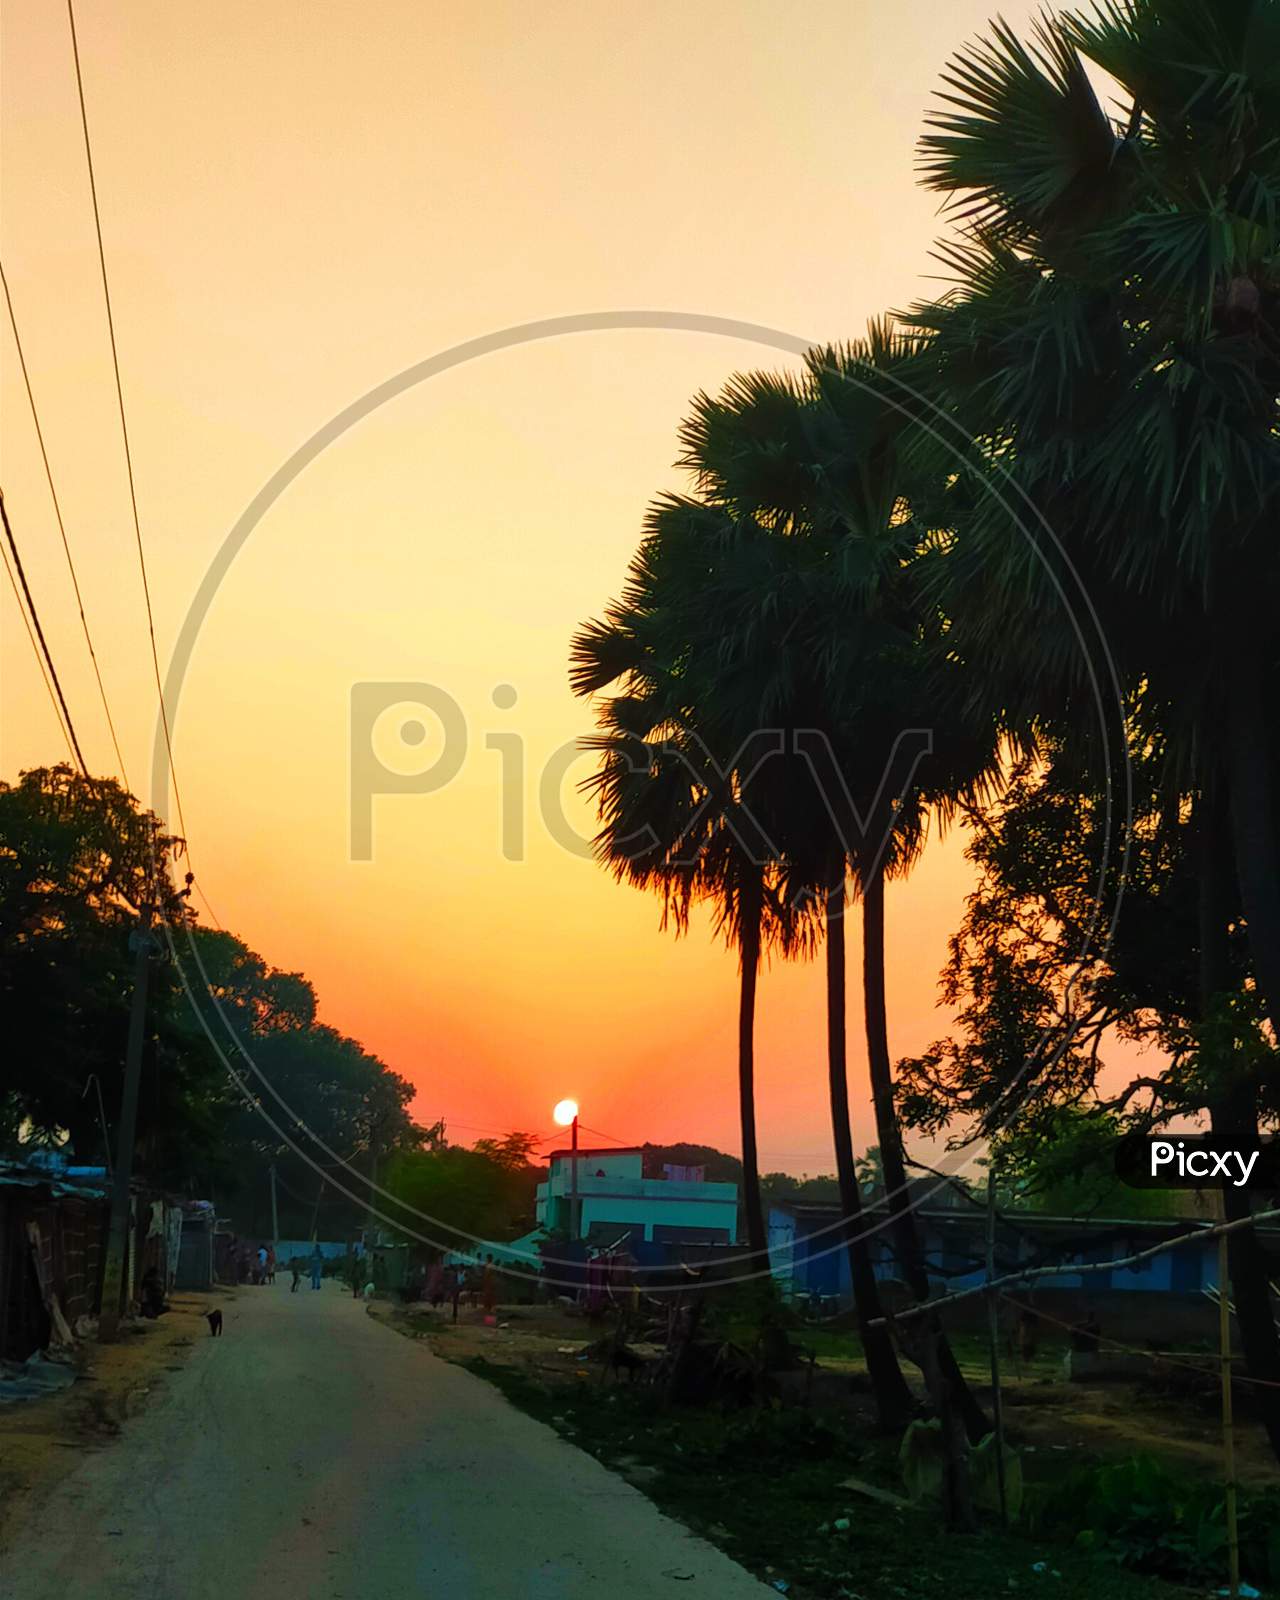 A nice sunset with palm trees in an Indian slum